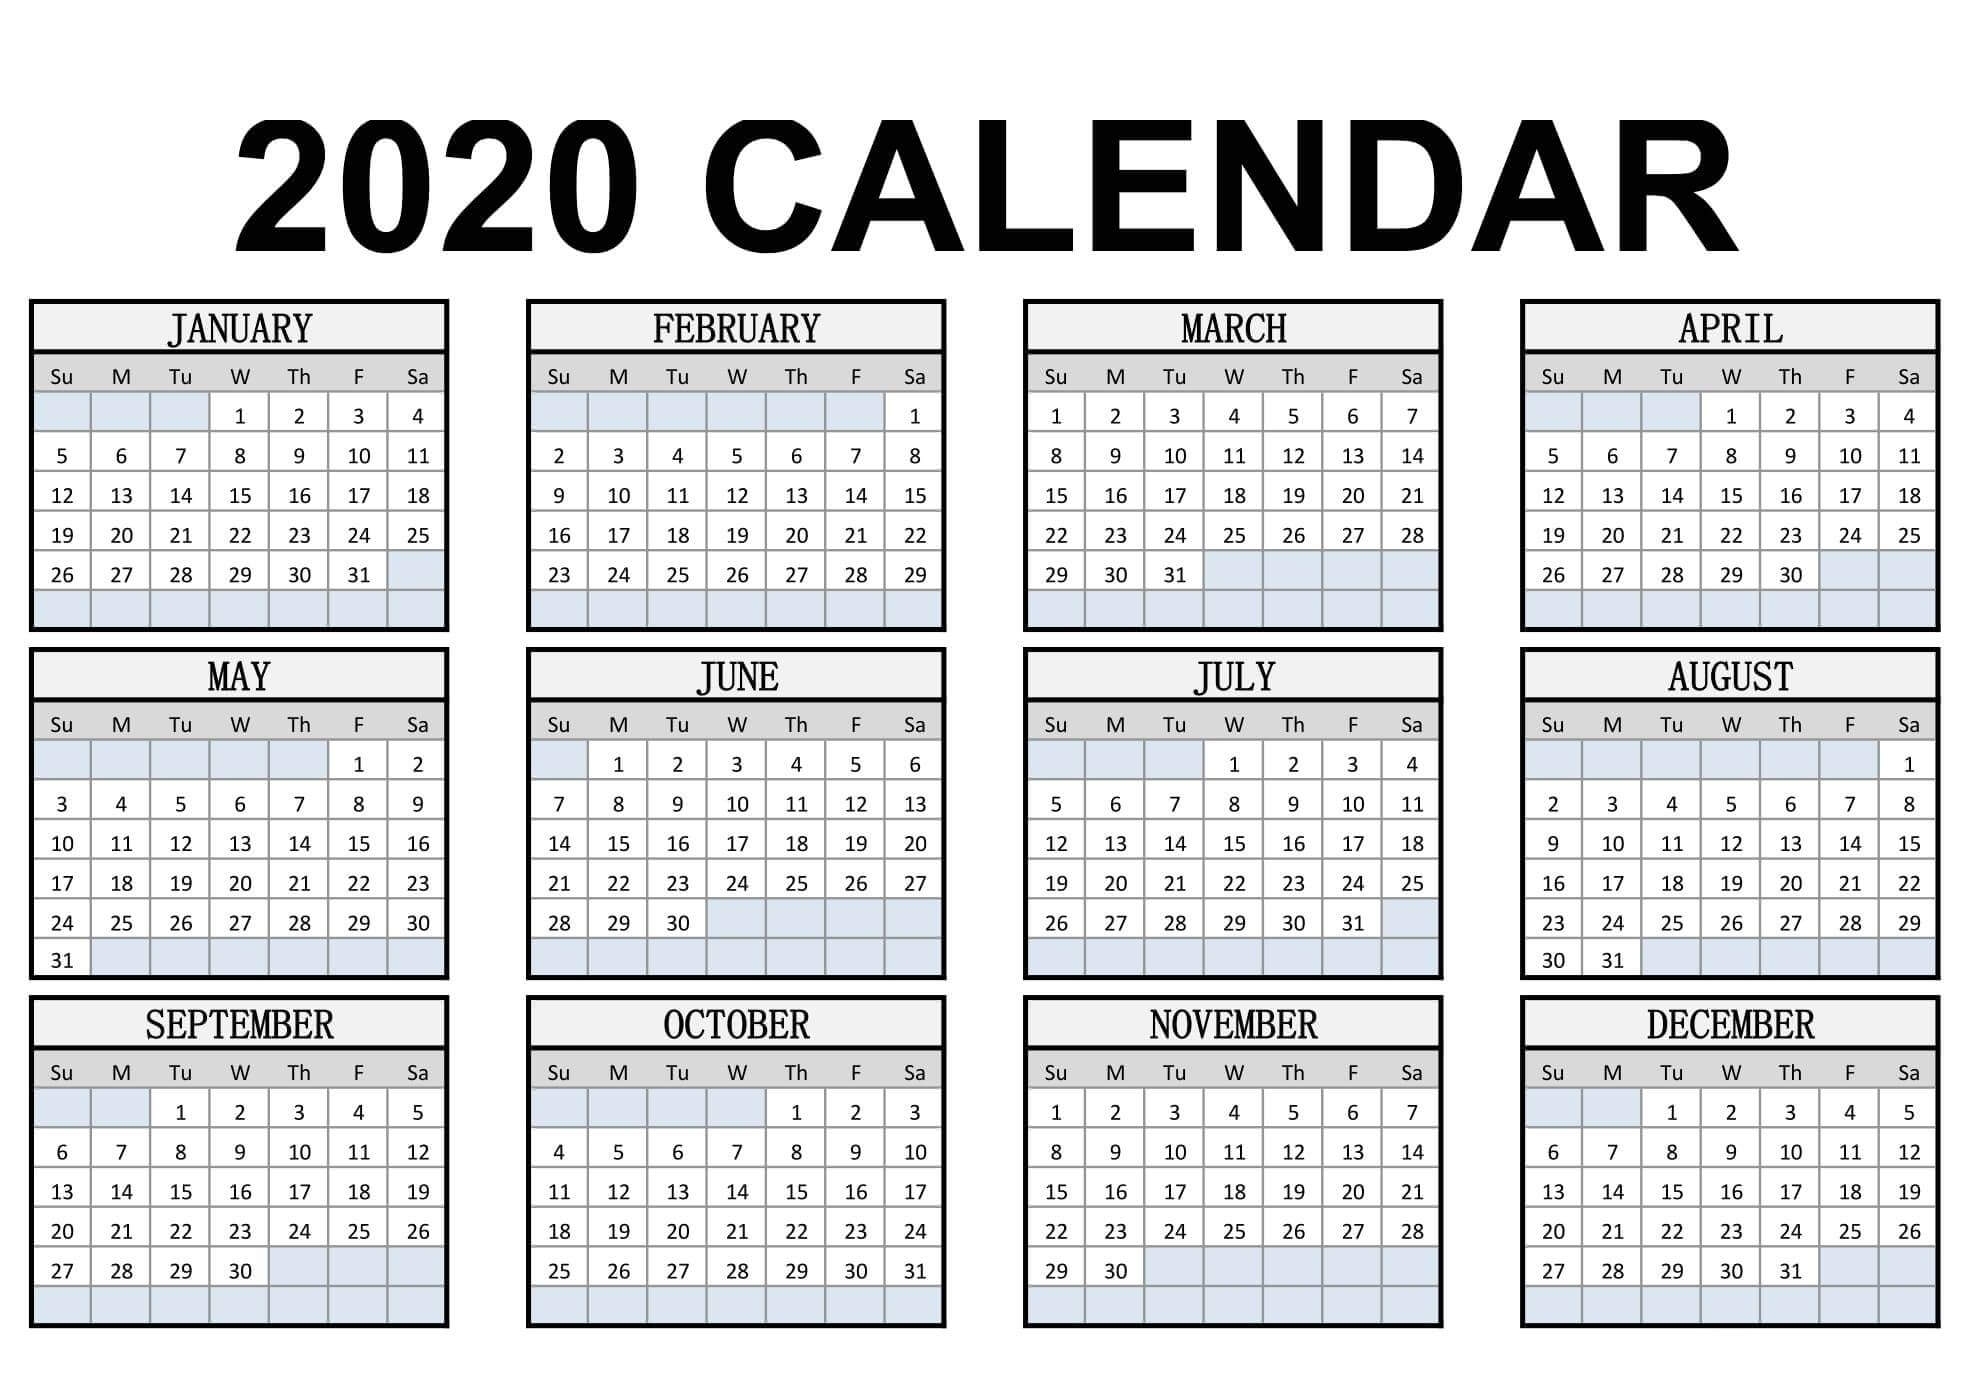 Calendar Year 2020 Holidays Template - 2019 Calendars For with Free Year At A Glance Calendar 2020 Printable